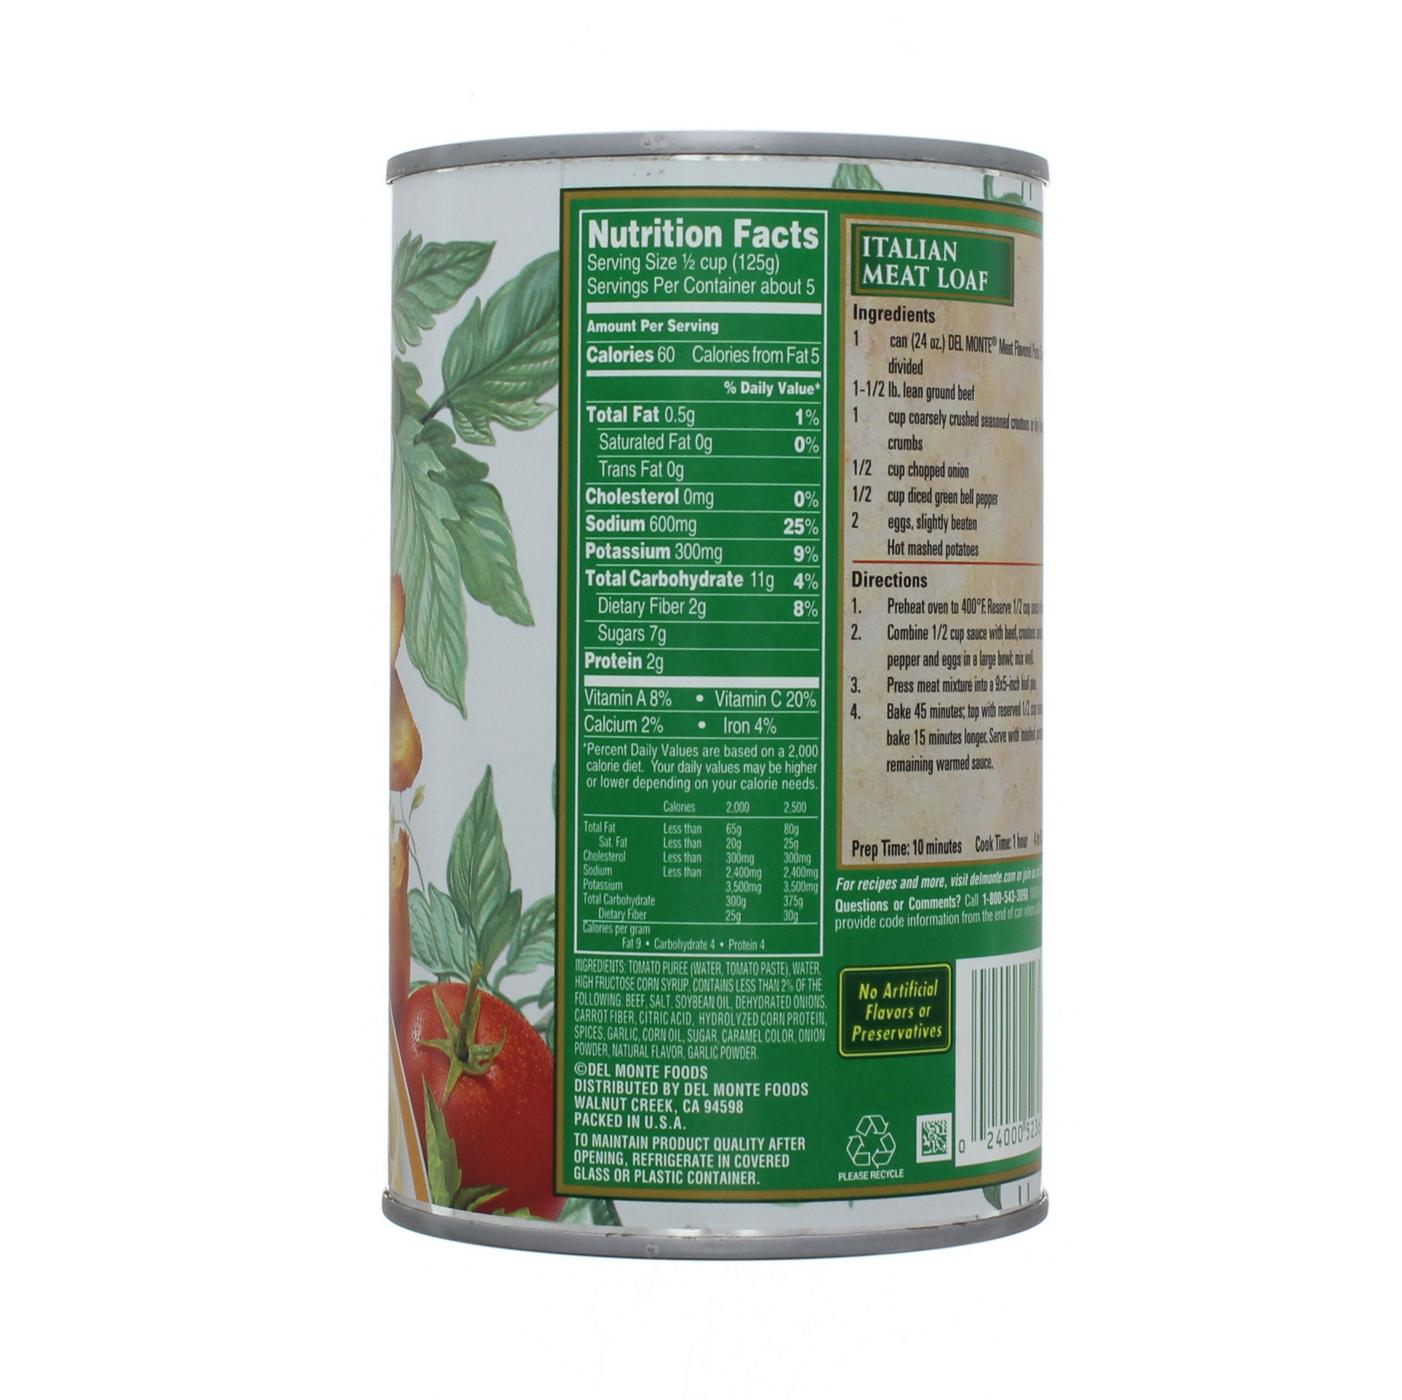 Del Monte Meat Flavored Pasta Sauce; image 2 of 2